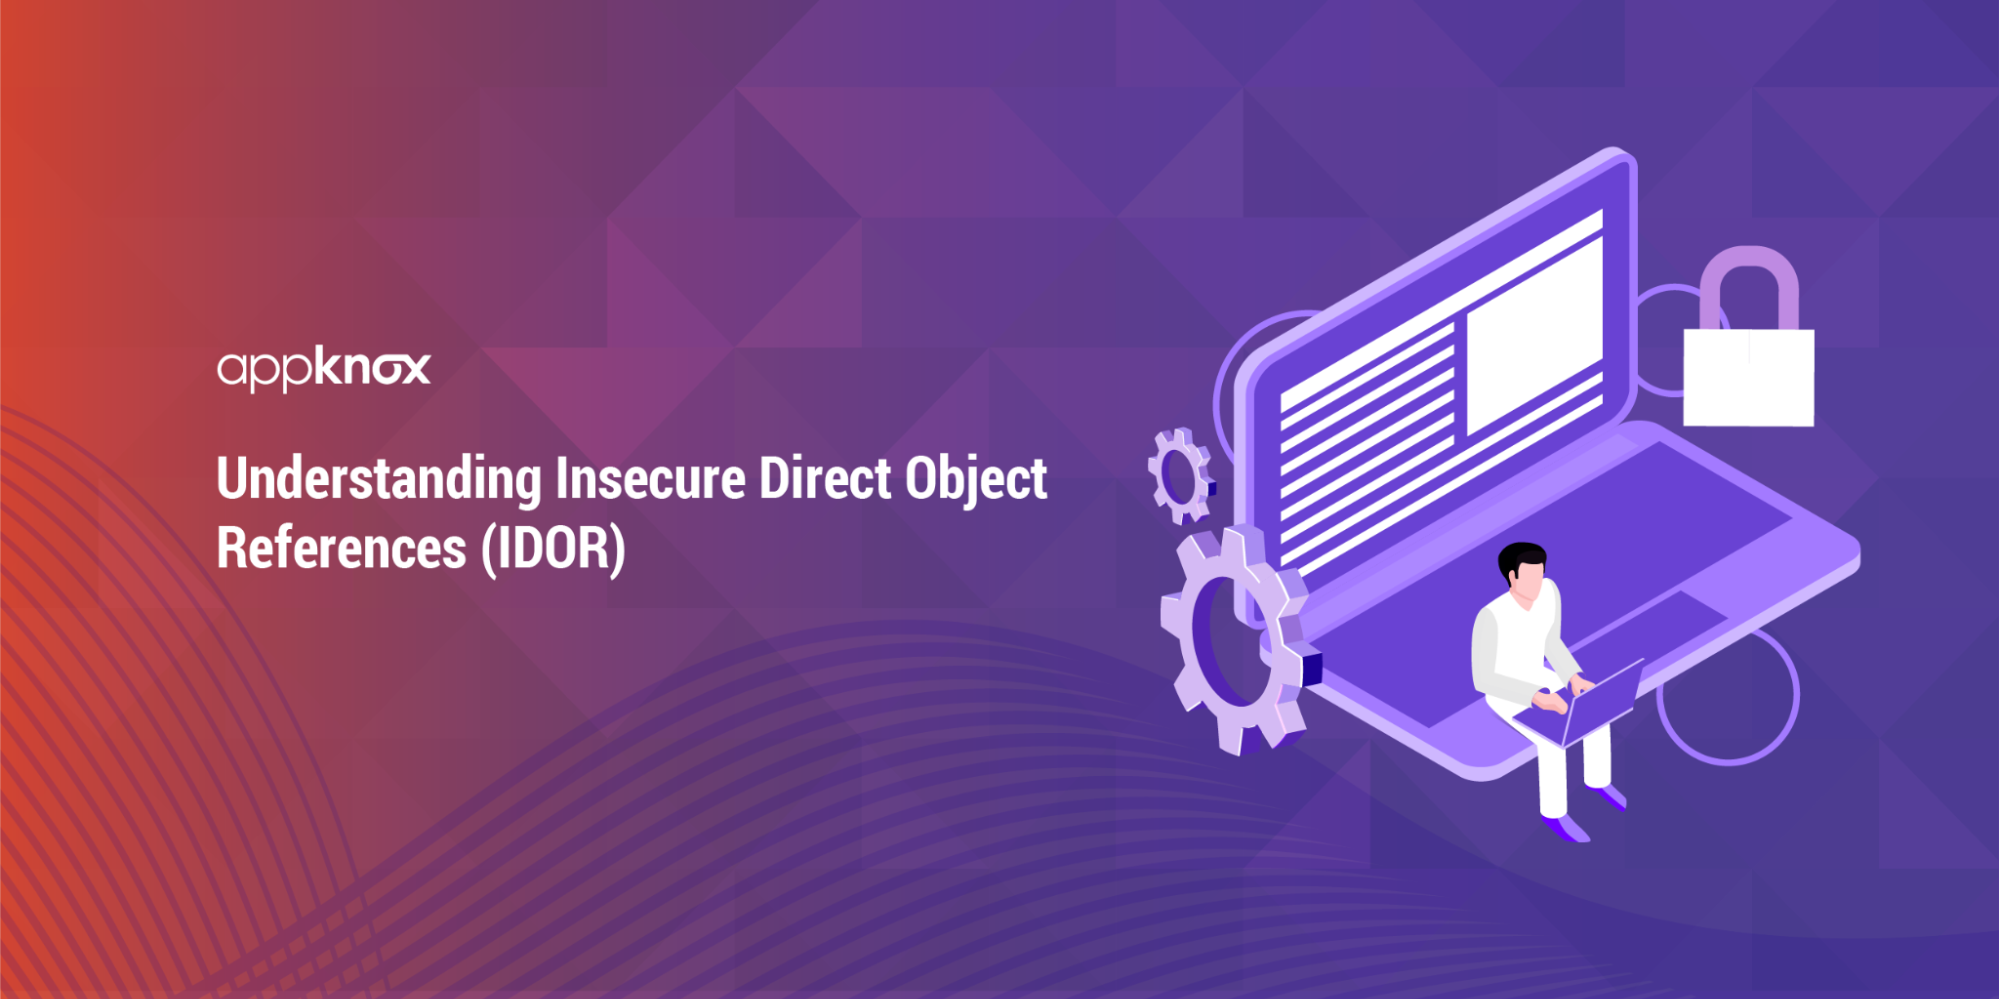 Understanding Insecure Direct Object References (IDOR)